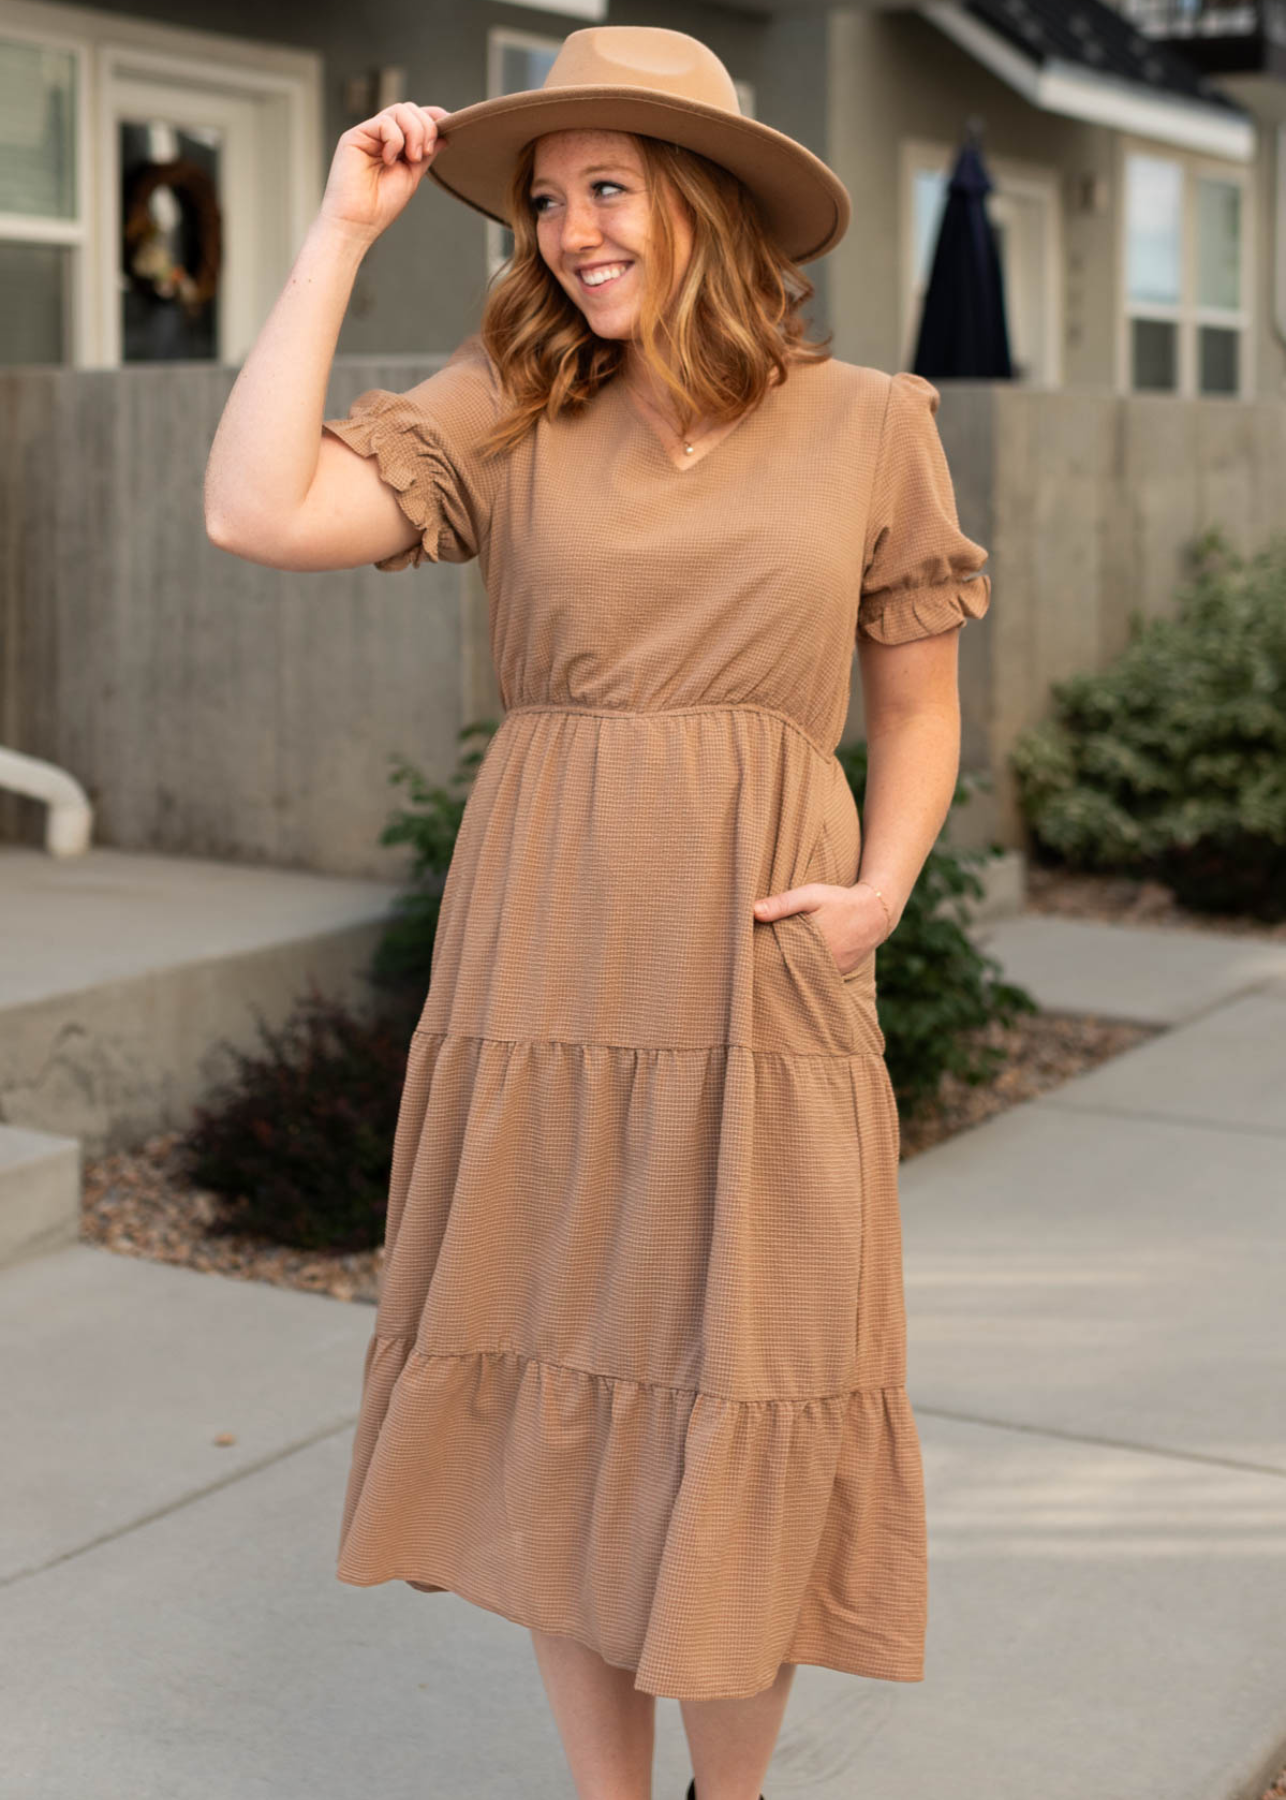 Short sleeve brown dress with tiered skirt and pockets